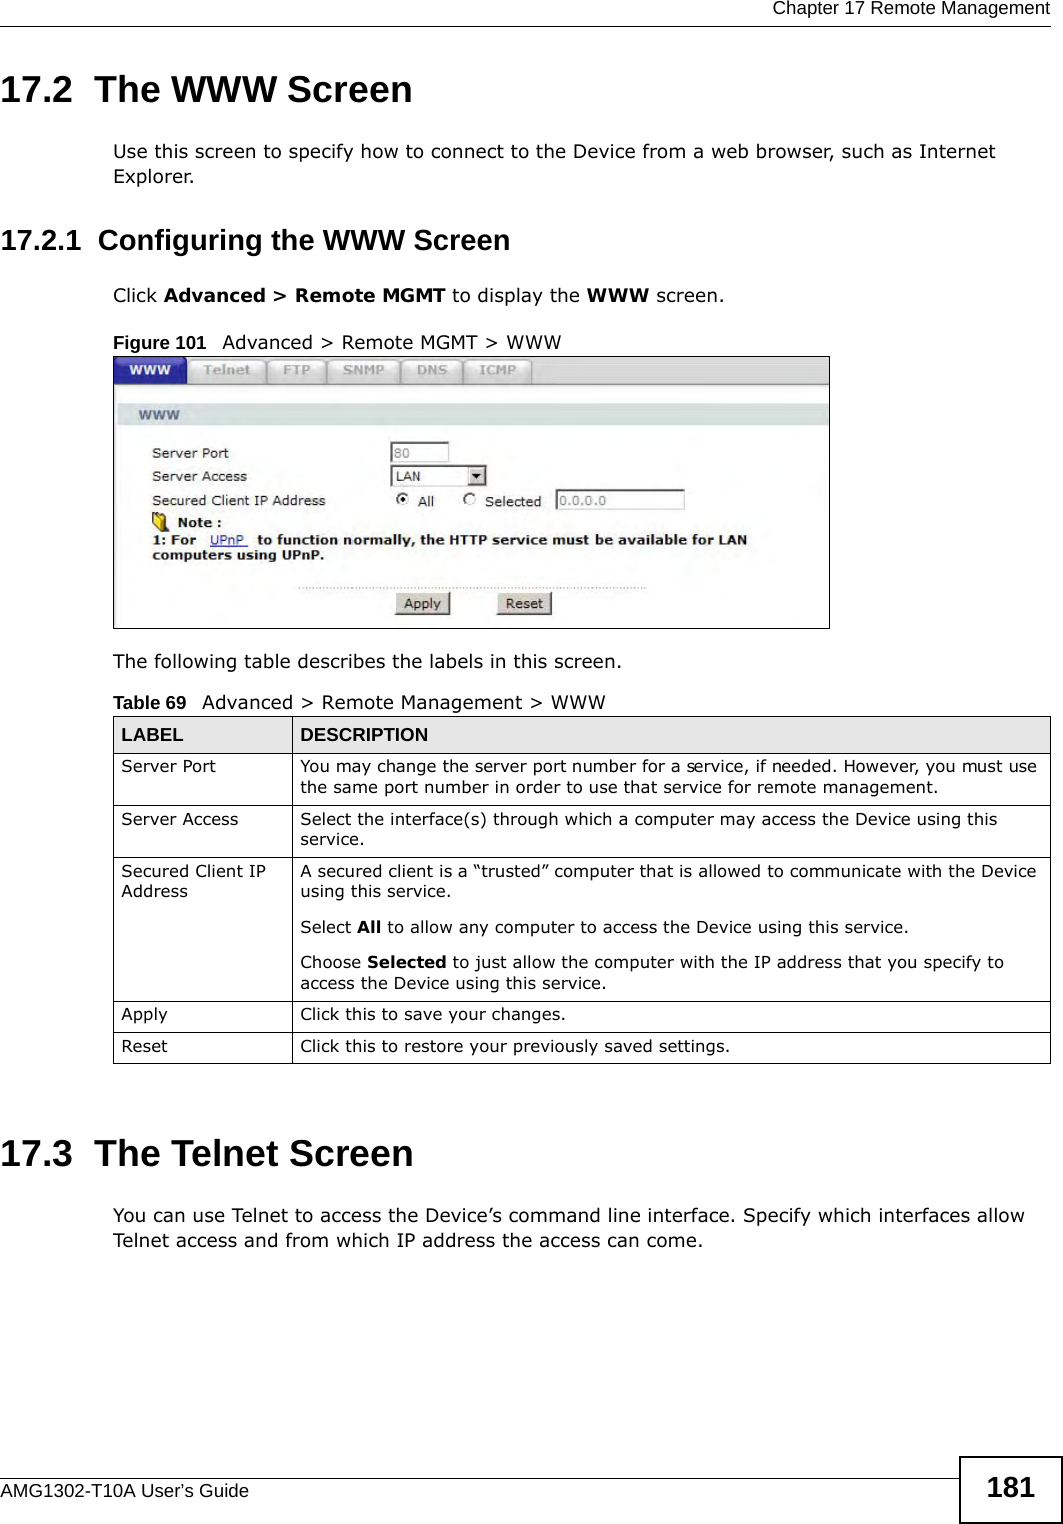  Chapter 17 Remote ManagementAMG1302-T10A User’s Guide 18117.2  The WWW ScreenUse this screen to specify how to connect to the Device from a web browser, such as Internet Explorer. 17.2.1  Configuring the WWW ScreenClick Advanced &gt; Remote MGMT to display the WWW screen.Figure 101   Advanced &gt; Remote MGMT &gt; WWWThe following table describes the labels in this screen.17.3  The Telnet ScreenYou can use Telnet to access the Device’s command line interface. Specify which interfaces allow Telnet access and from which IP address the access can come.Table 69   Advanced &gt; Remote Management &gt; WWWLABEL DESCRIPTIONServer Port You may change the server port number for a service, if needed. However, you must use the same port number in order to use that service for remote management.Server Access Select the interface(s) through which a computer may access the Device using this service.Secured Client IP AddressA secured client is a “trusted” computer that is allowed to communicate with the Device using this service. Select All to allow any computer to access the Device using this service.Choose Selected to just allow the computer with the IP address that you specify to access the Device using this service.Apply Click this to save your changes.Reset Click this to restore your previously saved settings.